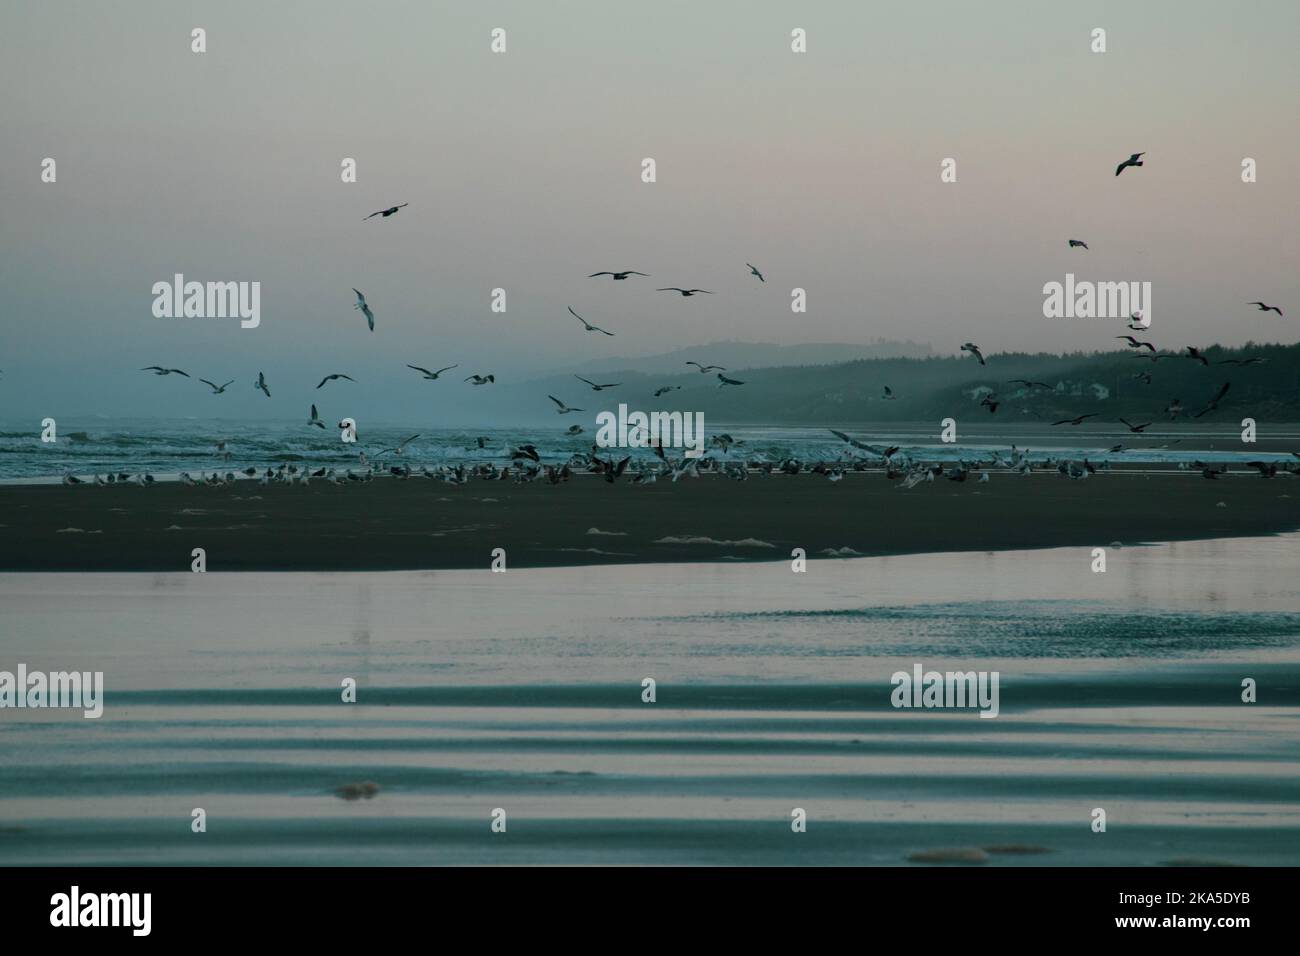 A large flock of birds takes off from a sand bar on the beach of Oregon during sunset. Stock Photo